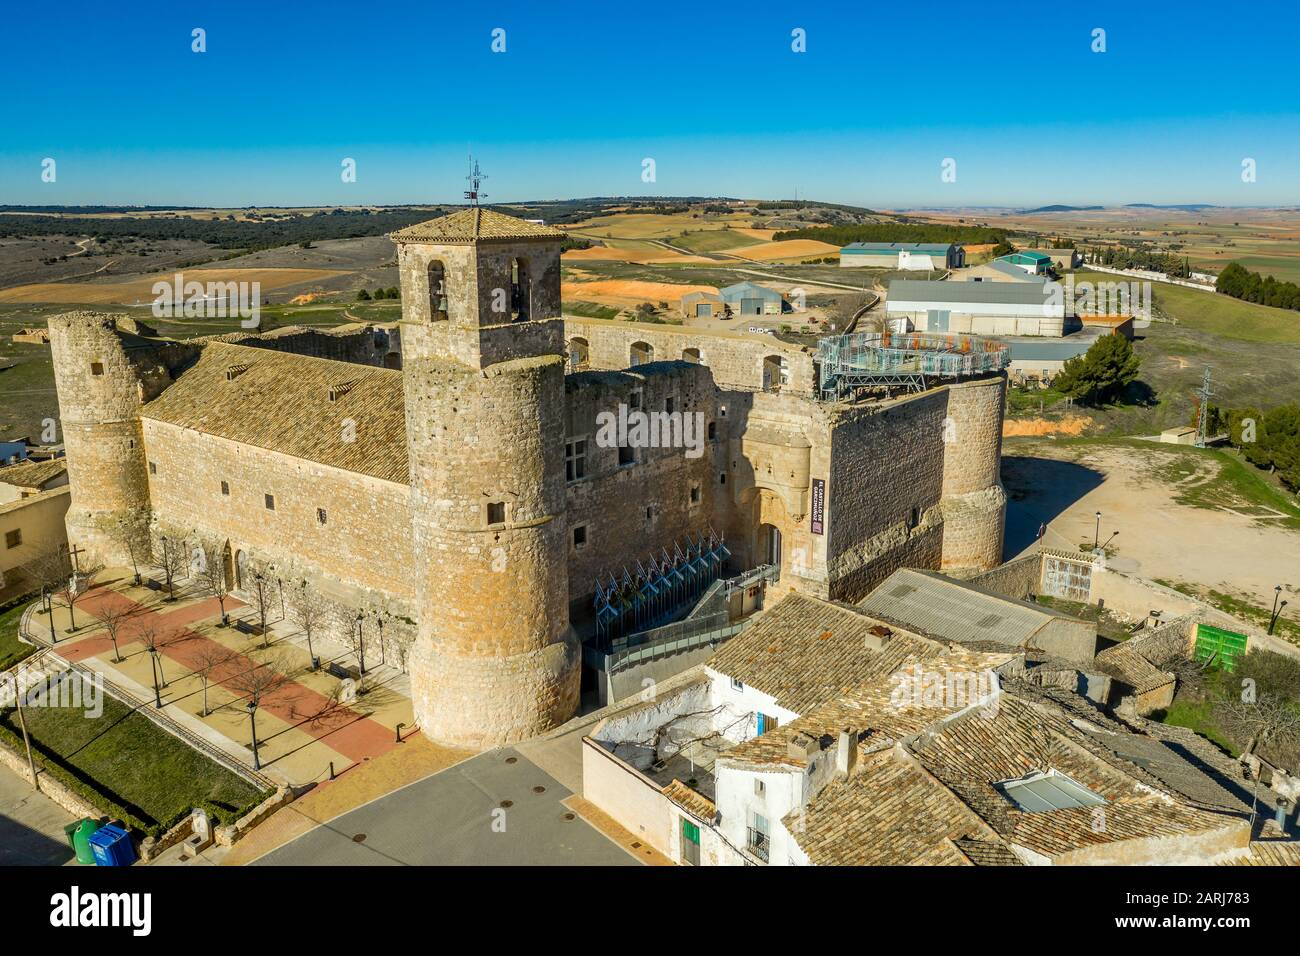 Aerial view of Garcimunoz medieval castle church where ancient architecture meets modern in Spain Stock Photo